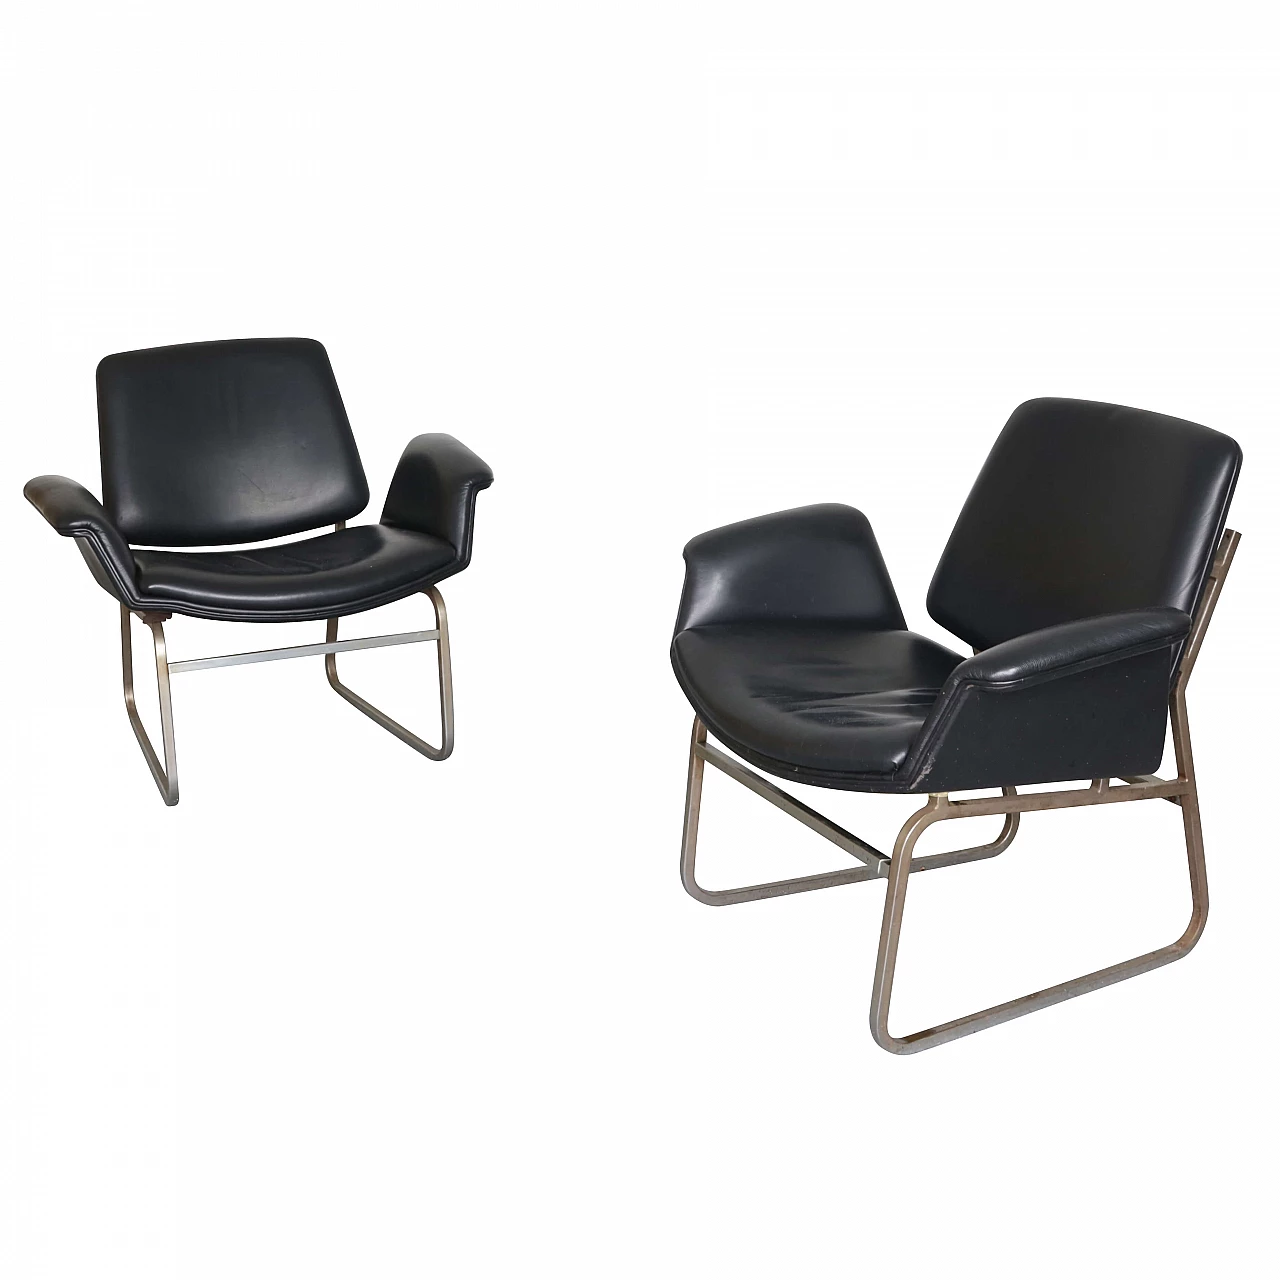 Pair of Double Shell armchairs by Illum Wikkelsoe for Arflex, 1950s 1268942